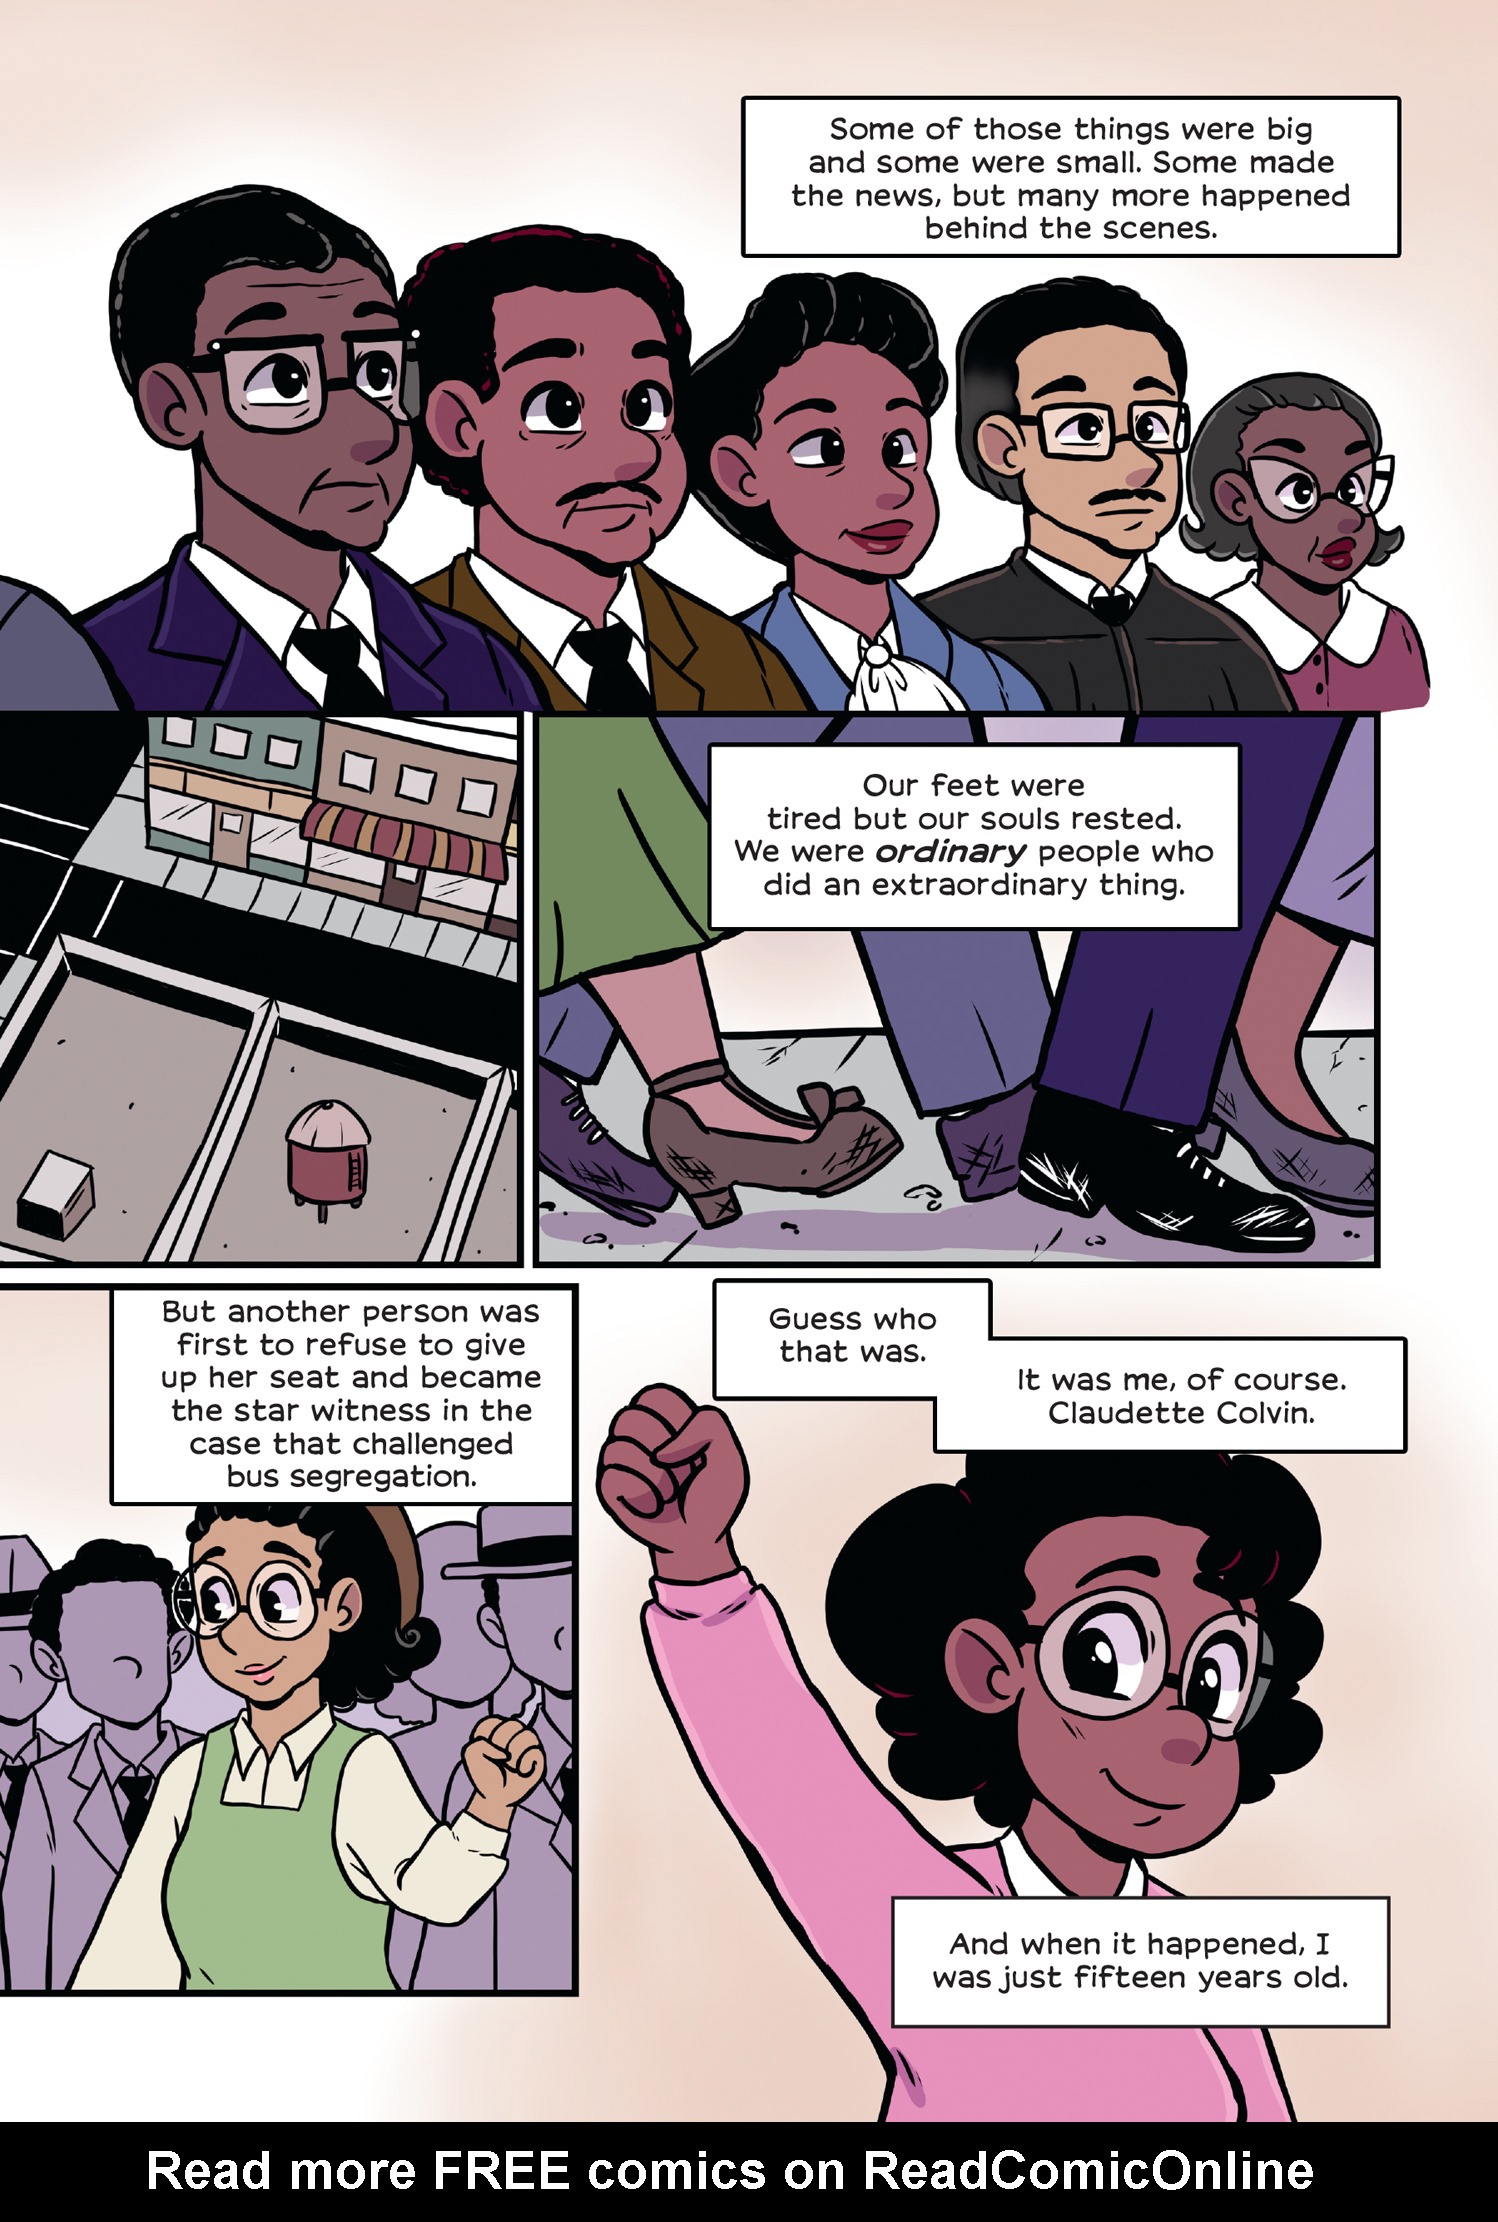 Read online History Comics comic -  Issue # Rosa Parks & Claudette Colvin - Civil Rights Heroes - 13